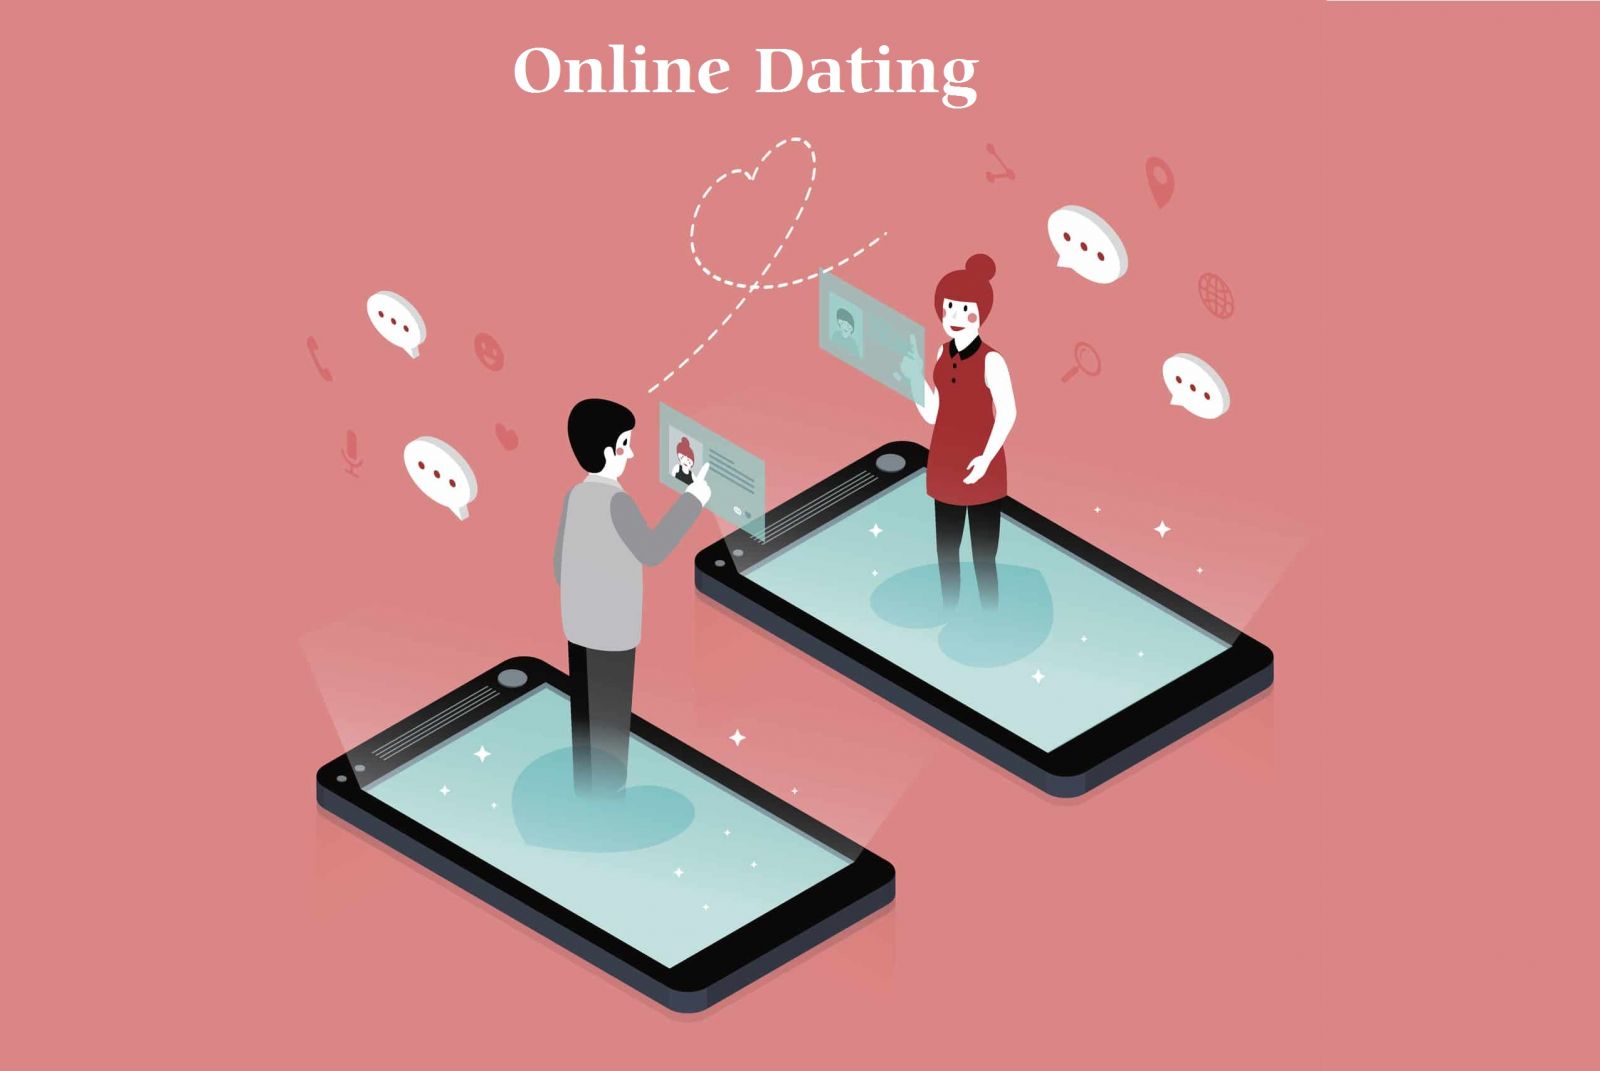 Learn how Beginners to Online Dating may Enjoy this new Venture